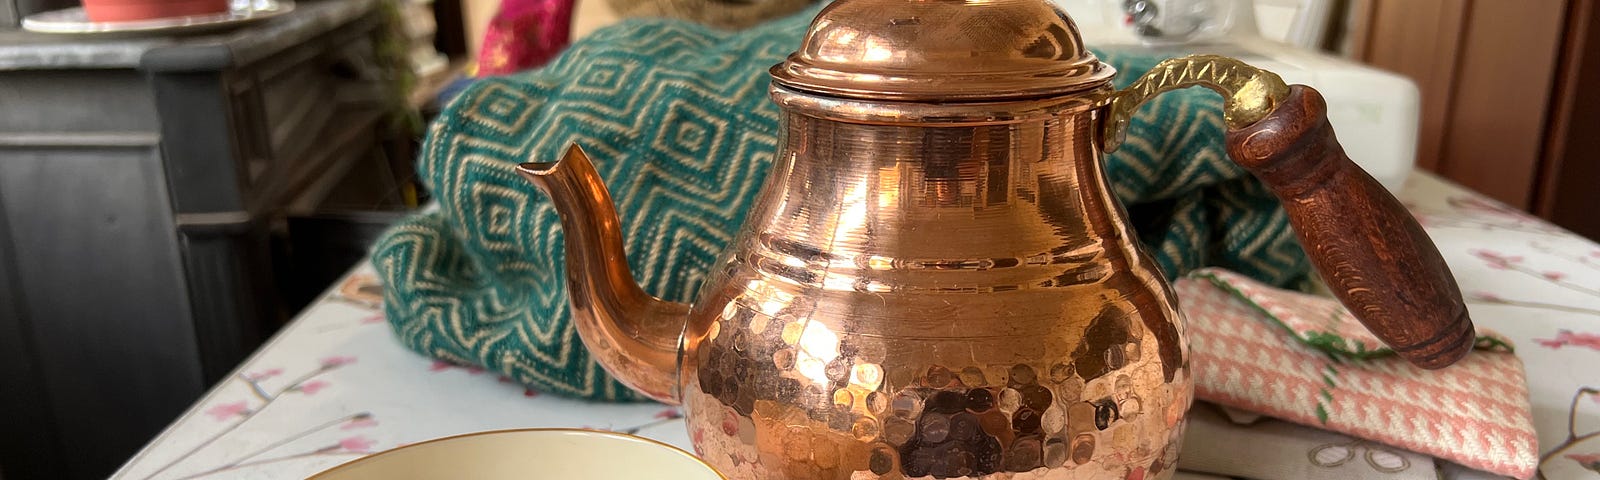 A vintage teacup full of tea sits on a sewing table next to a copper teapot